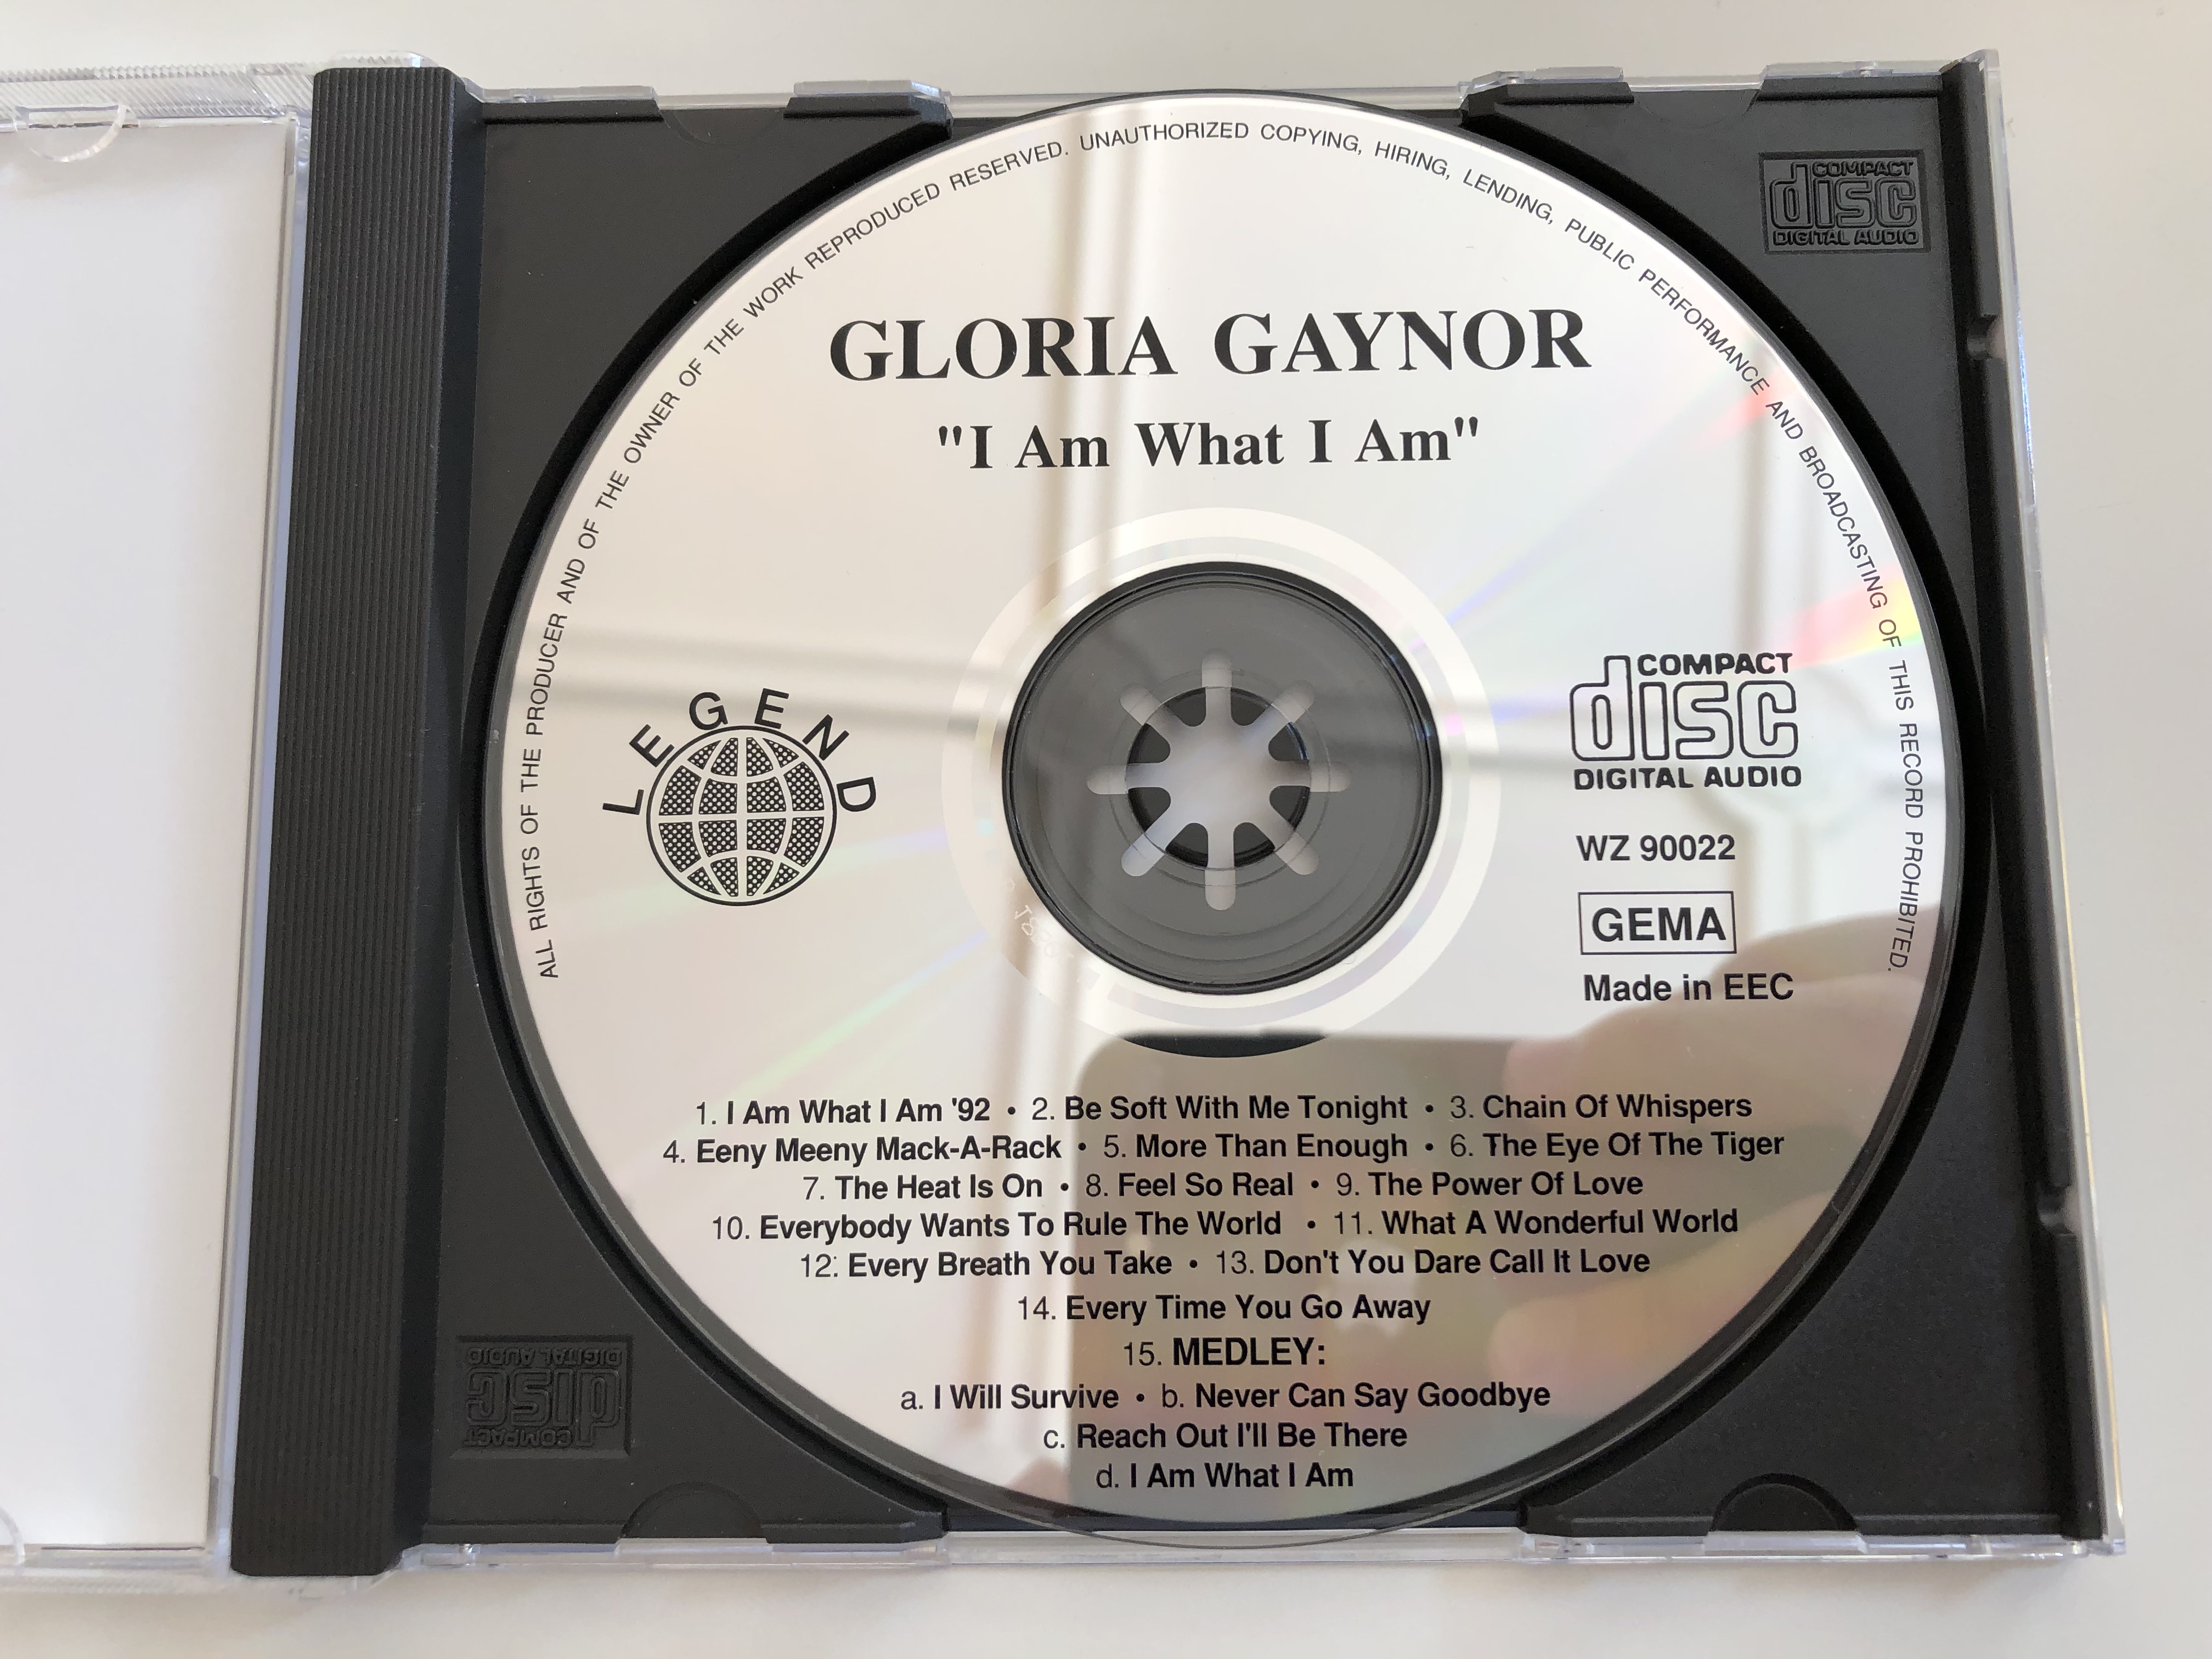 gloria-gaynor-i-am-what-i-am-more-than-enough-medley-i-will-survive-never-can-say-goodbye-audio-cd-1993-wz-90022-2-.jpg